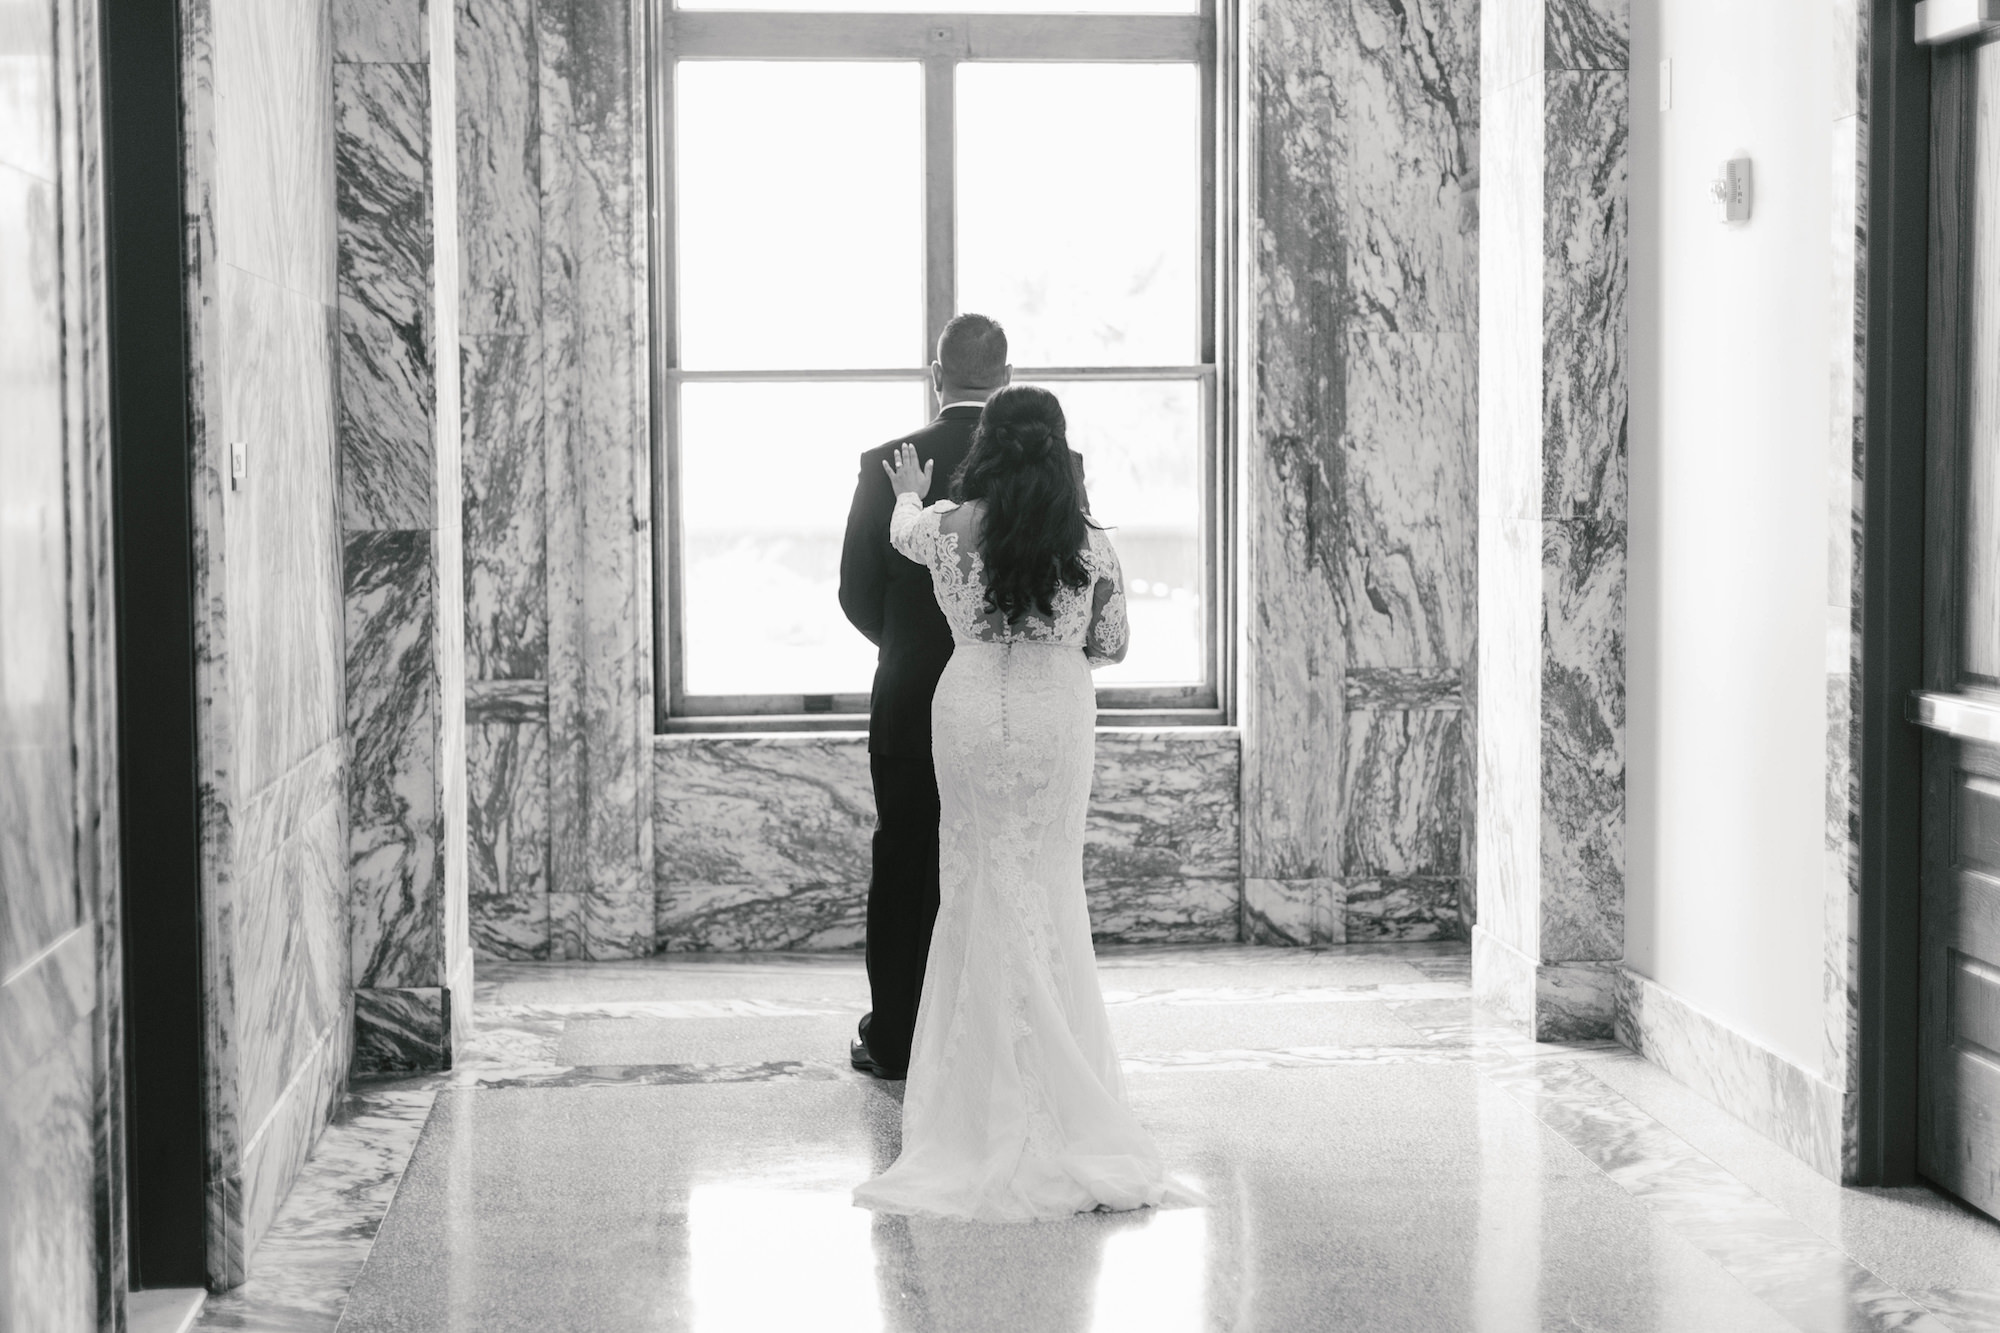 Romantic Bride Jessica from Parties A'la Carte and Groom Black and White First Look Wedding Portrait at Historic Courthouse Tampa Wedding Venue Le Meridien